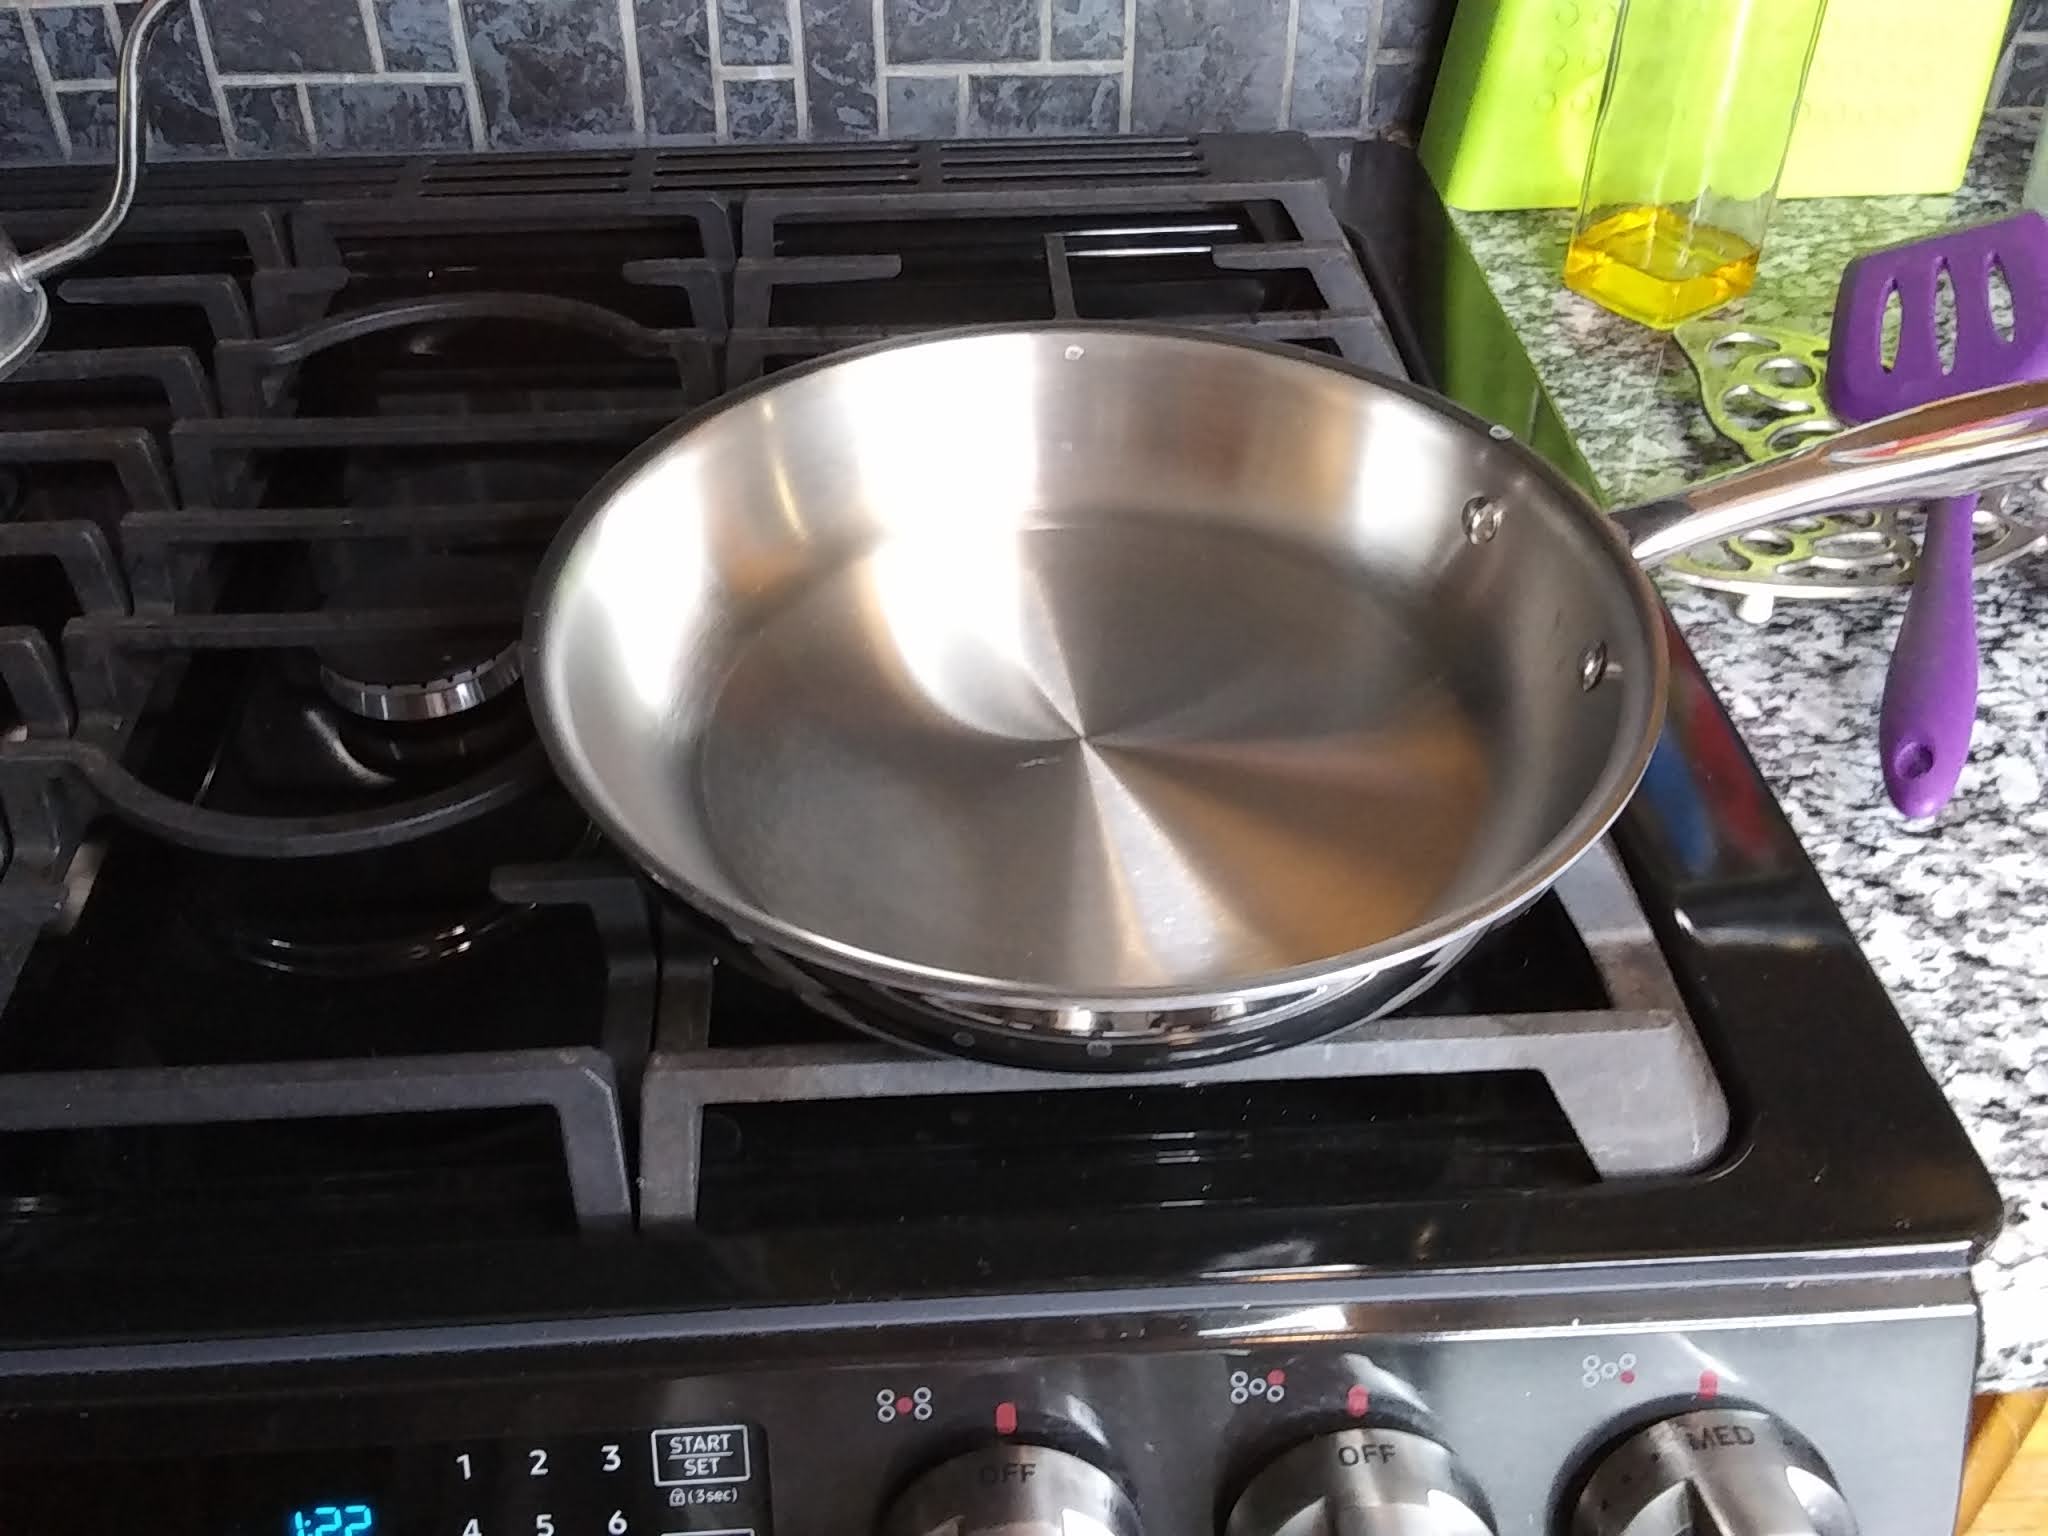 Cast iron, non-stick or stainless steel: Which cooking surface